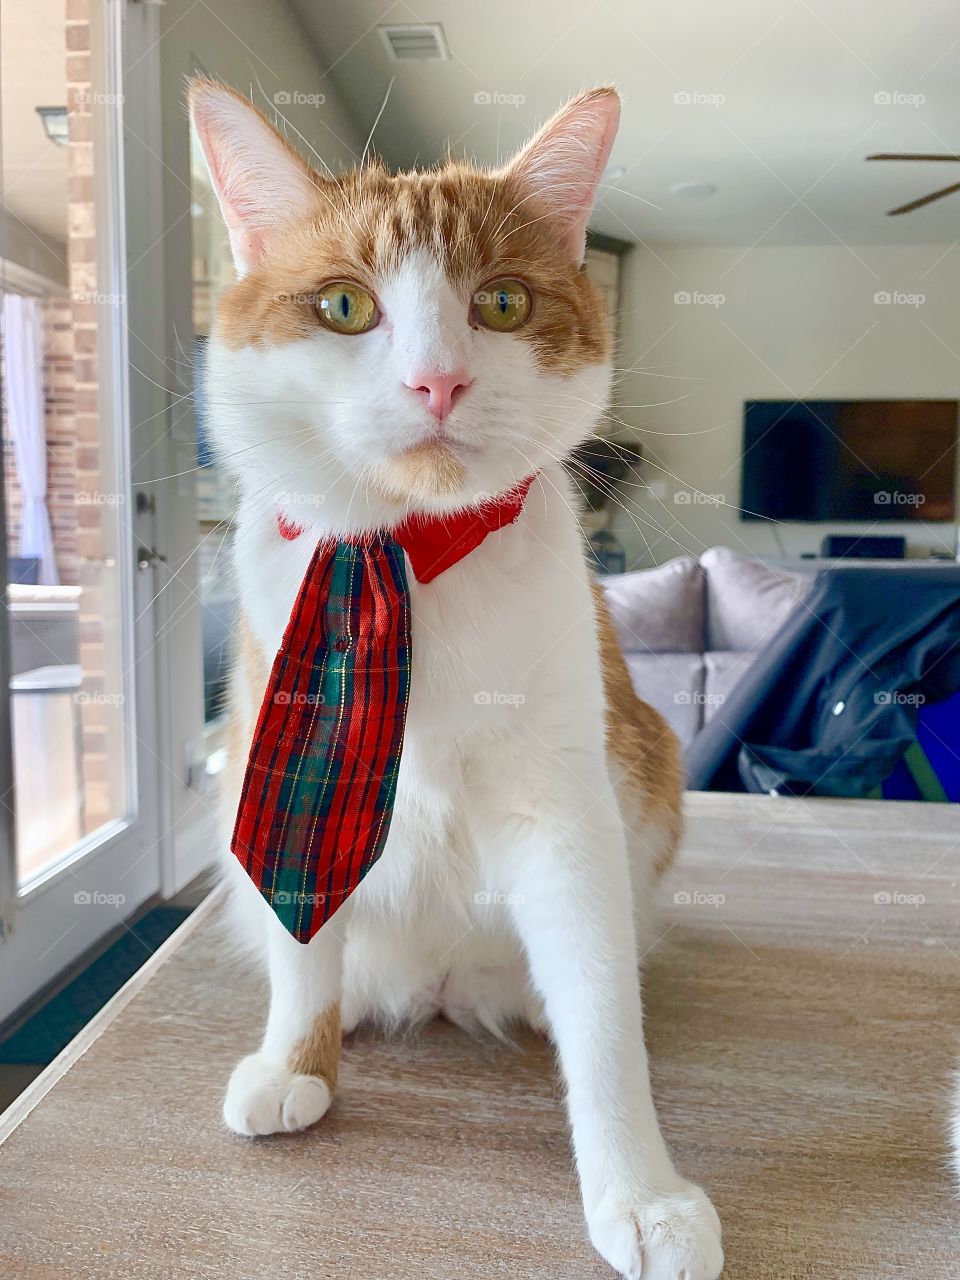 Orange and white cat wearing a tie and looking super cute. 